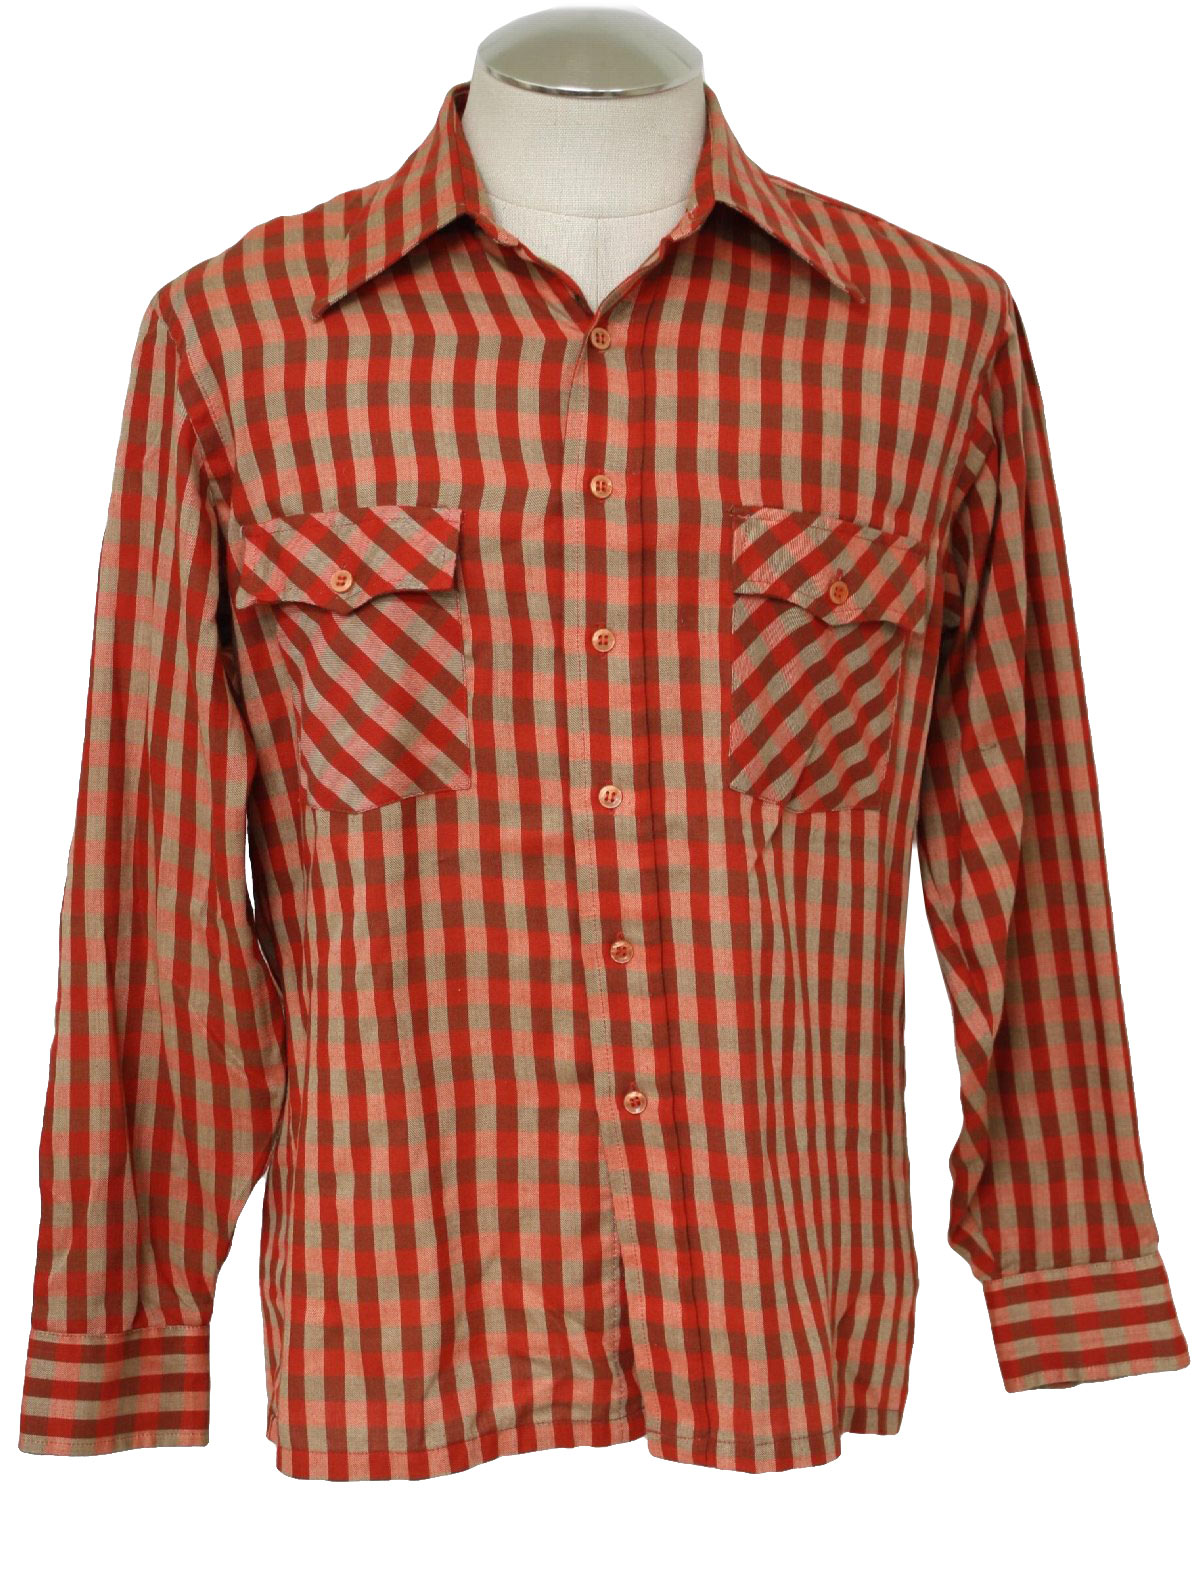 1970's Vintage JC Penney Western Shirt: 70s -JC Penney- Mens reds, and ...